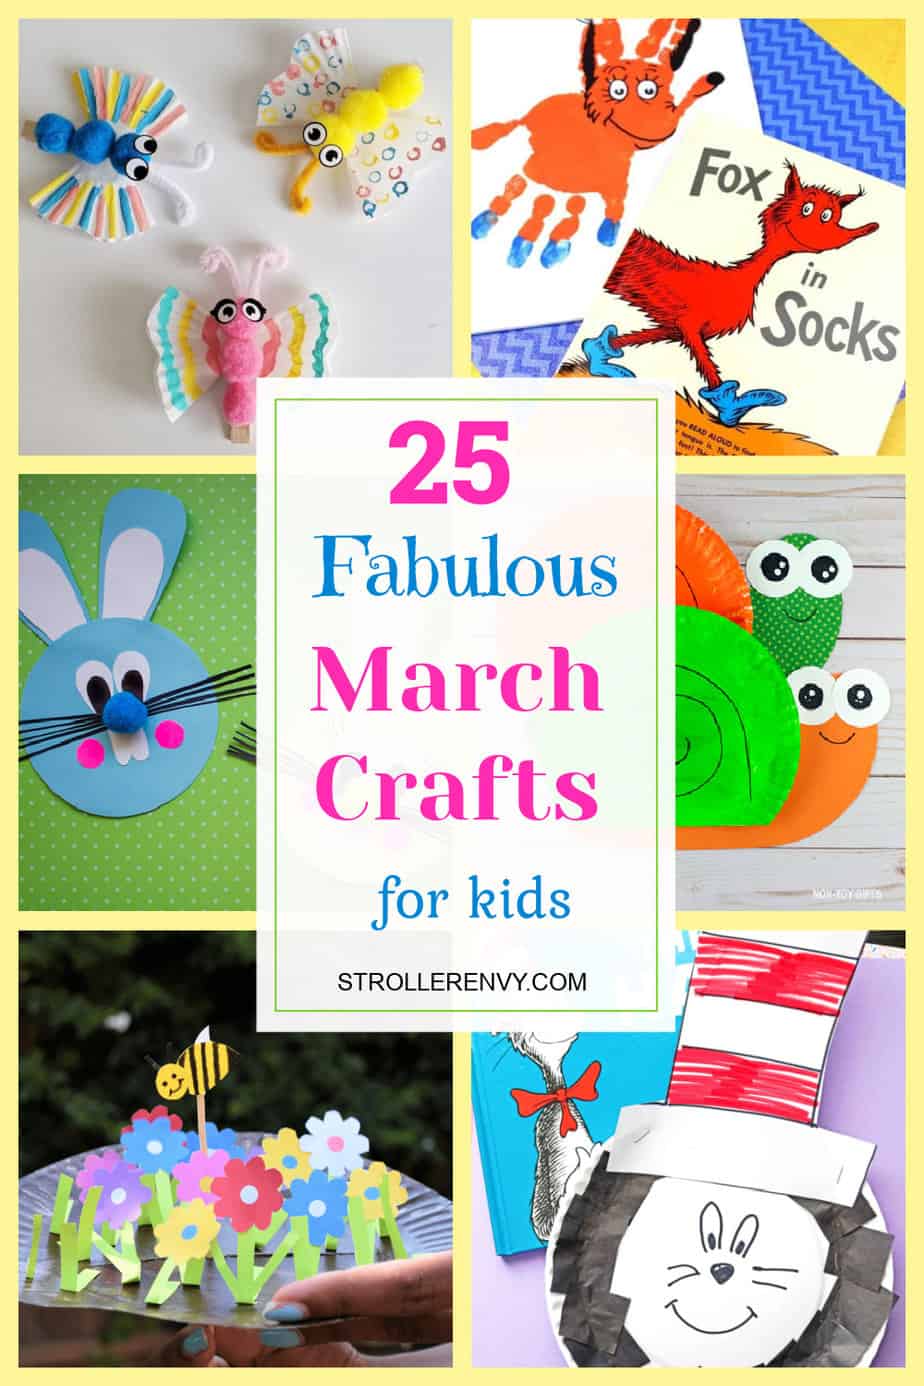 March Crafts for Kids 